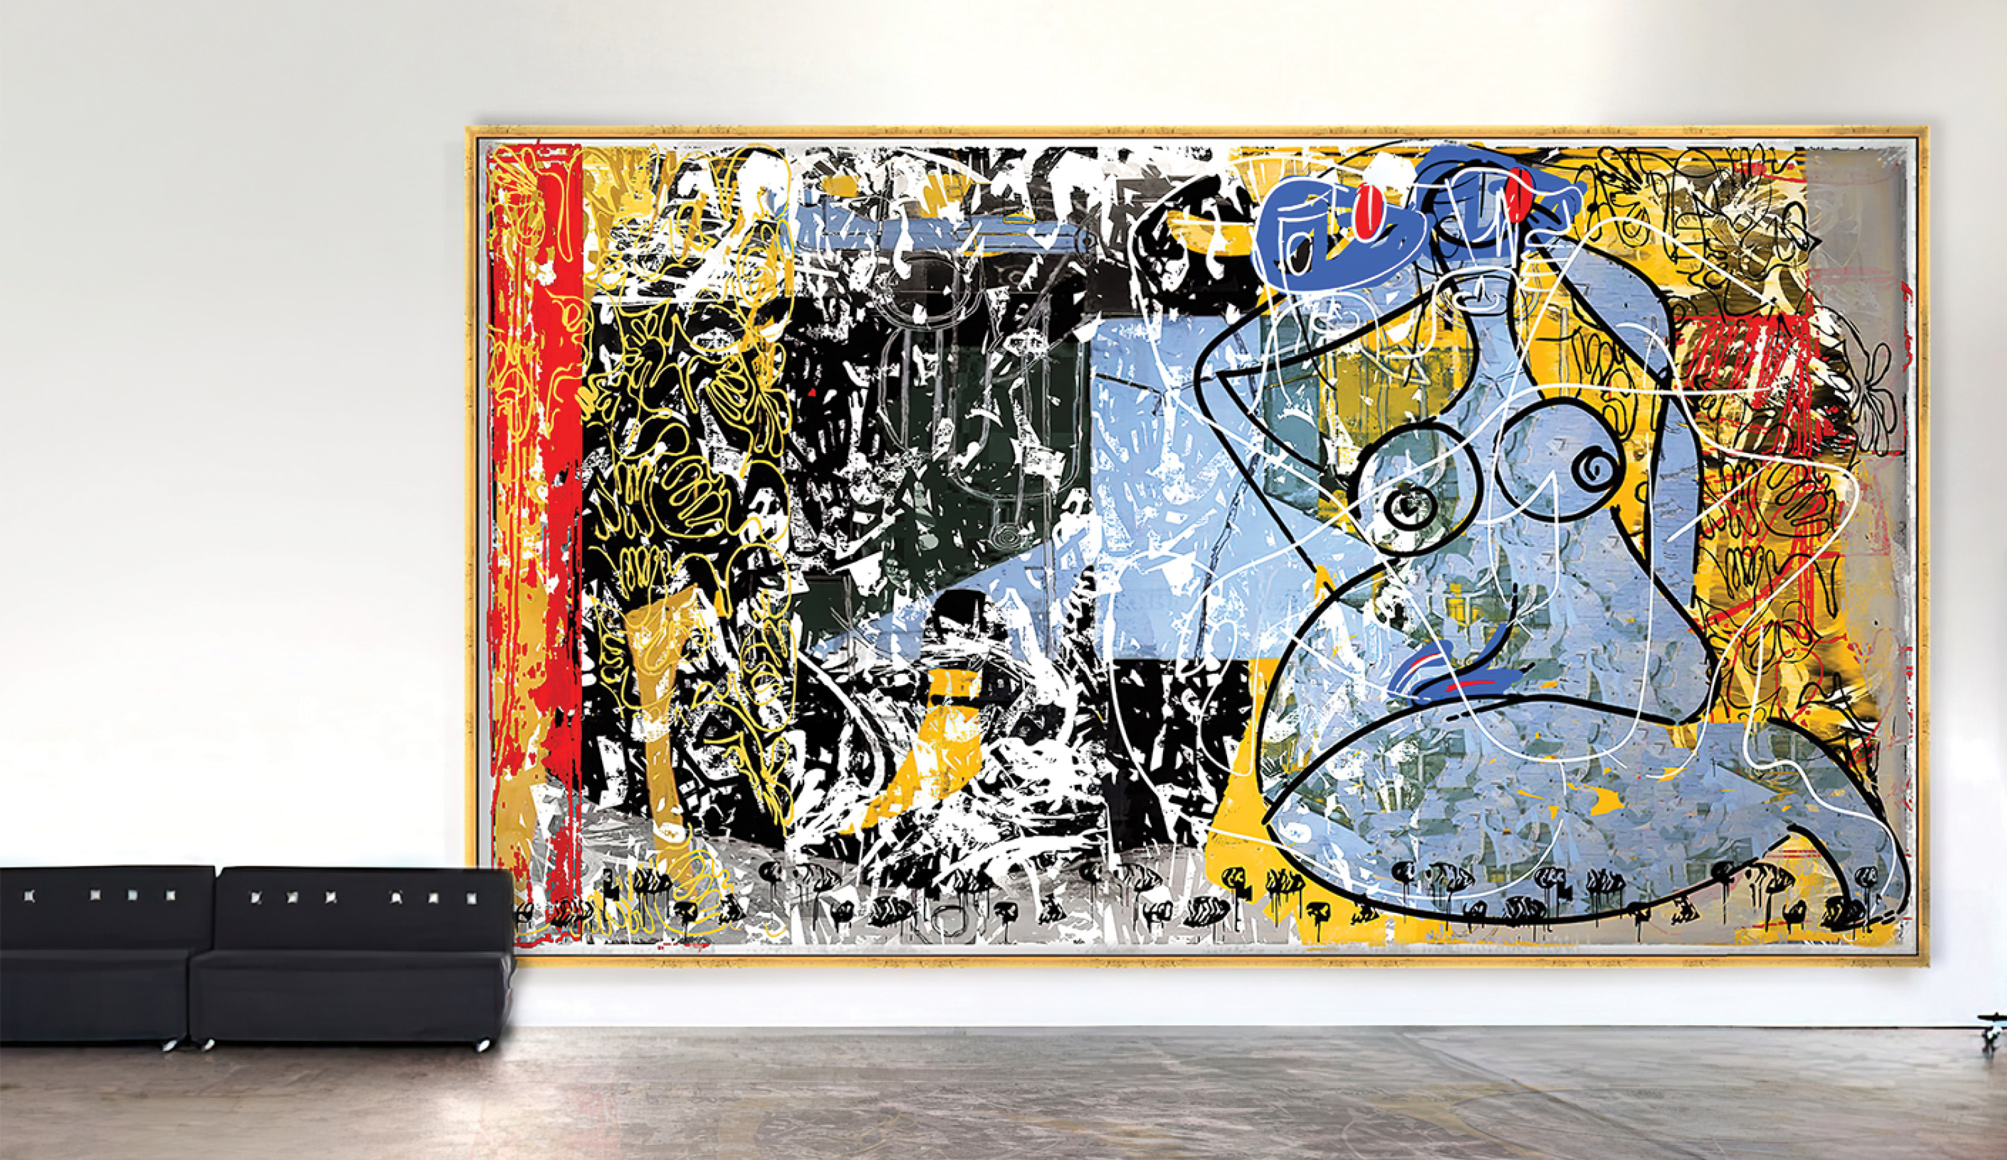 Robert Santoré “THROUGH THE SPLENDOR OF THE FIRMAMENT” 100 x 176in (245 x 447cm) Oil, oil stick, military and industrial enamels on paper on Belgian linen